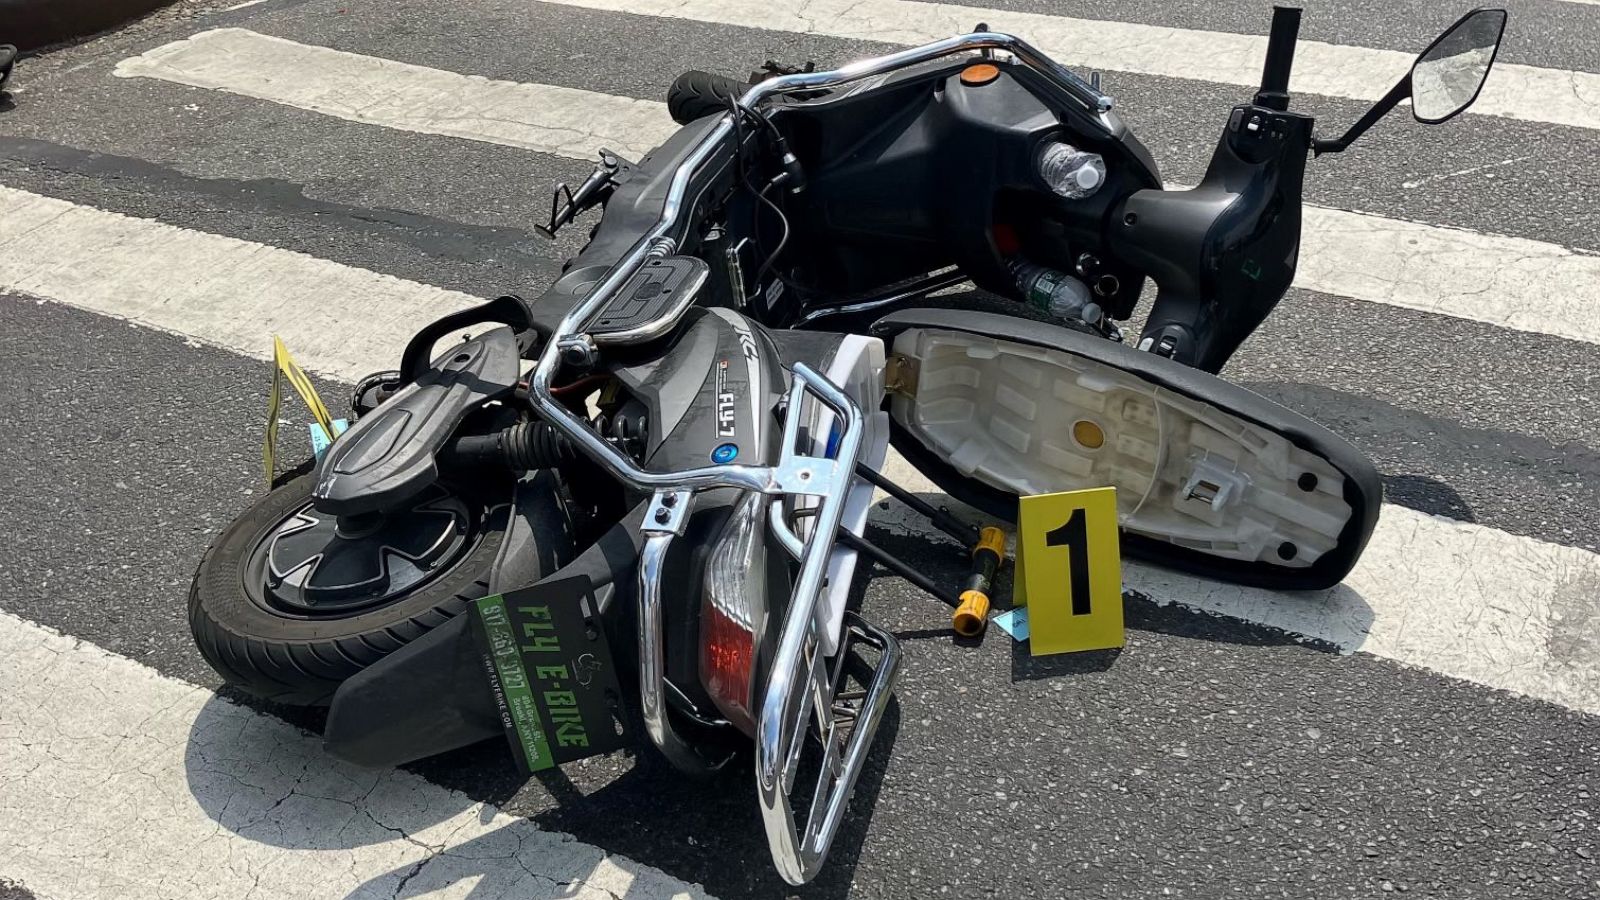 Inde vant Grænseværdi 1 dead, 3 injured after gunman fired from scooter in apparent random  shooting spree: NYPD - ABC News